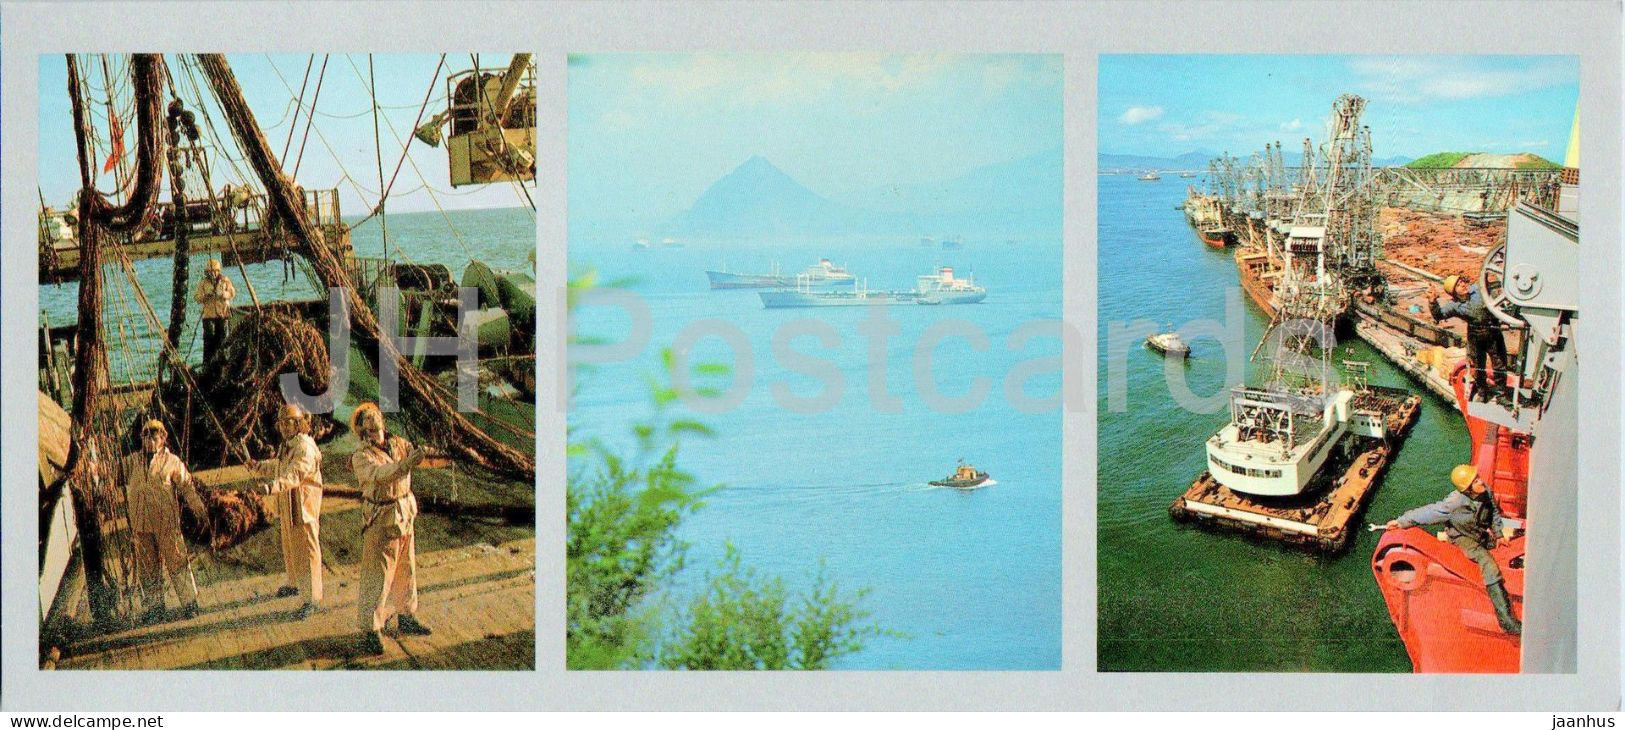 Bay Of The Peter The Great - Nakhodka - Port - Ship - 1980 - Russia USSR - Unused - Rusland